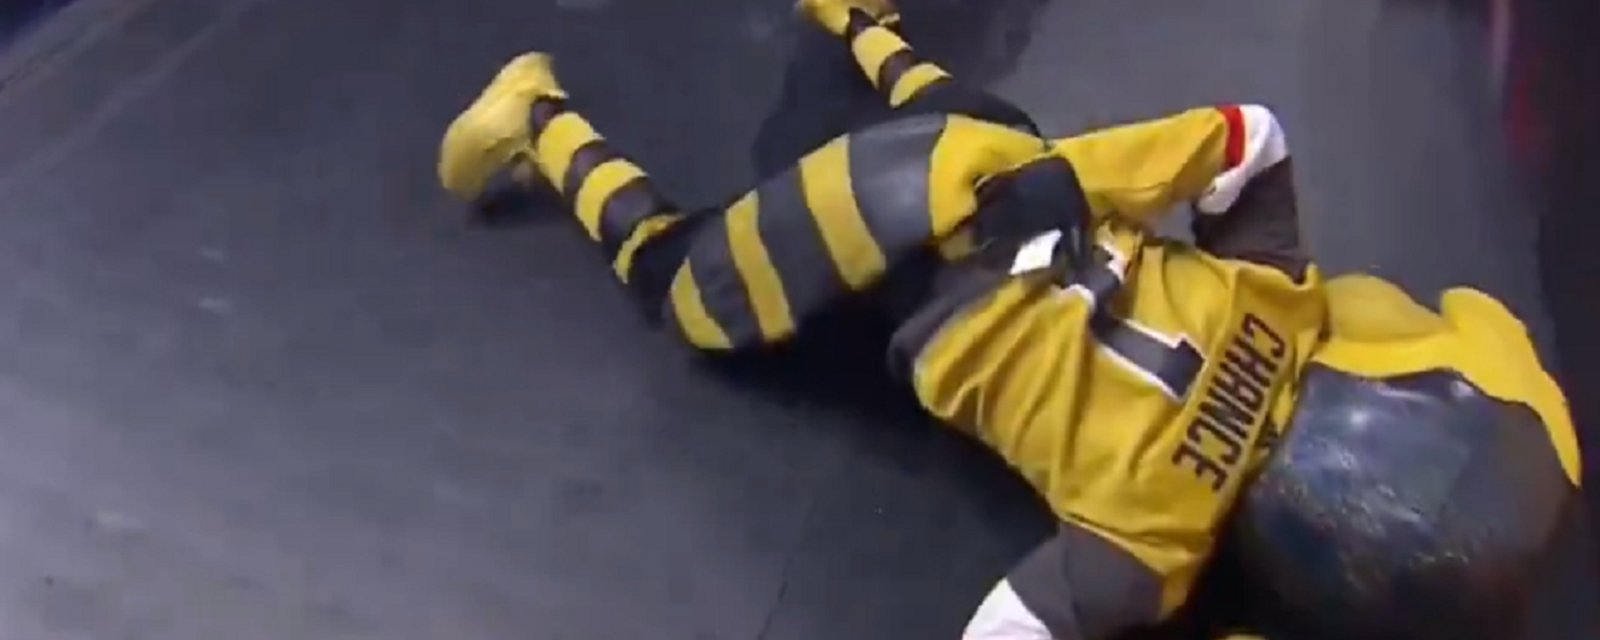 Golden Knights mascot “Chance” attacked on Saturday night.